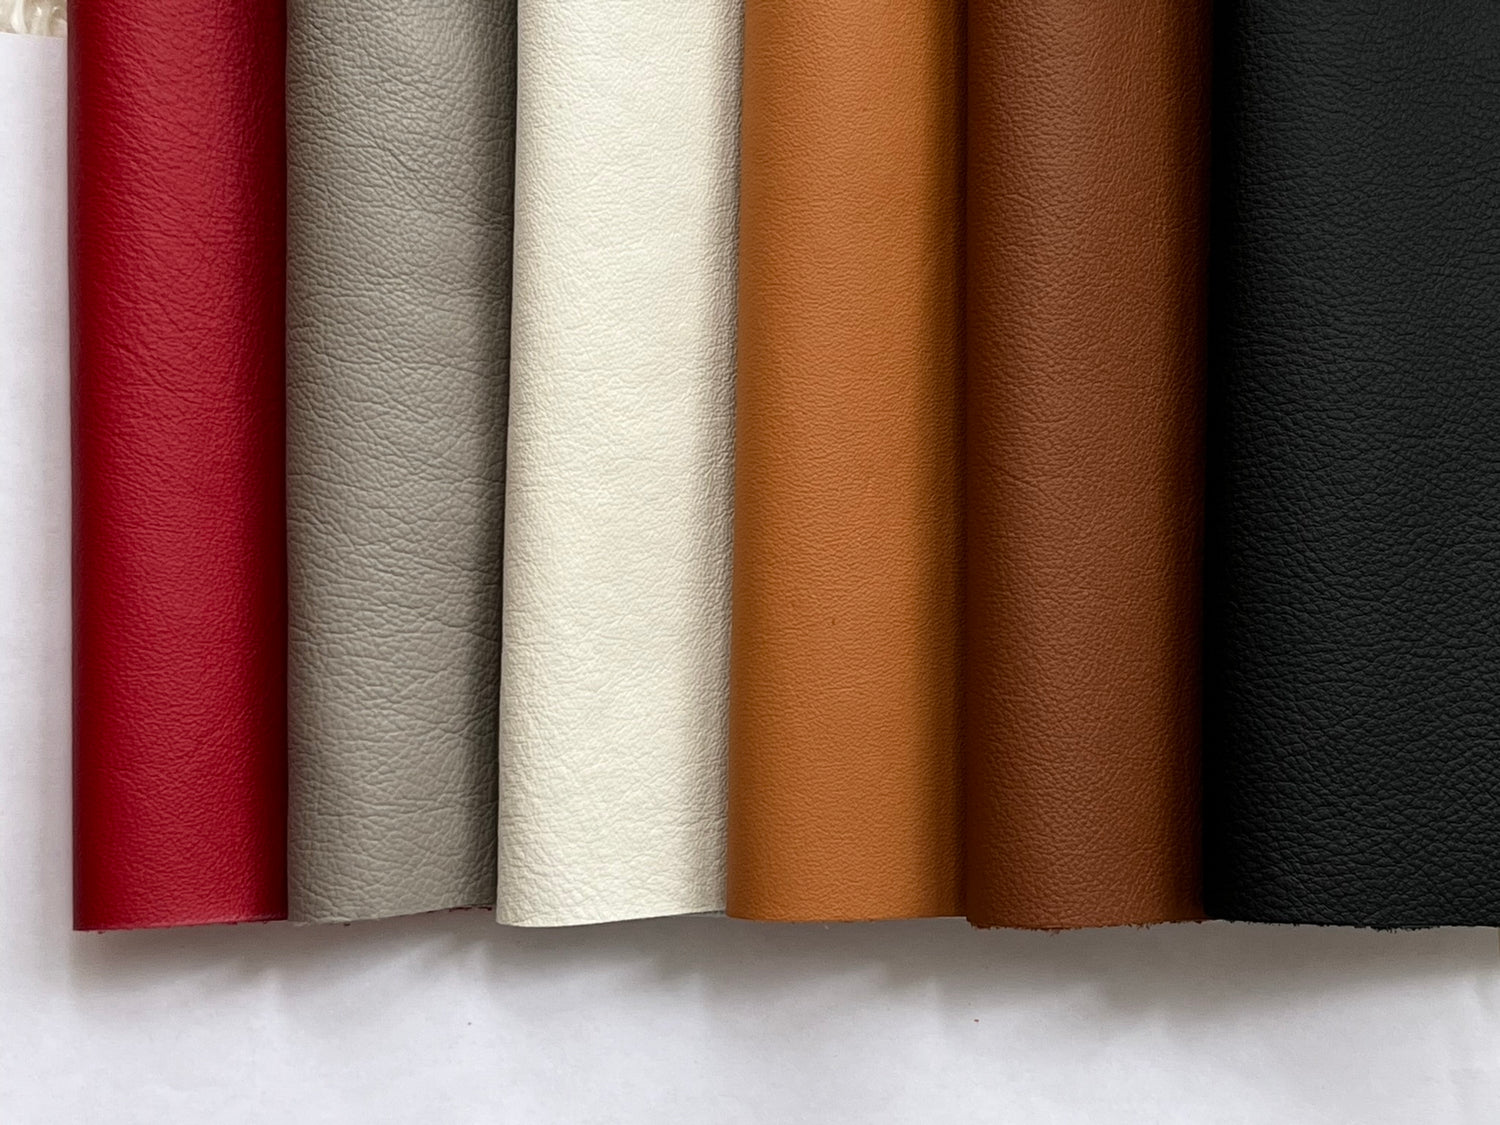 Phillips Design customization:  leather options and colors